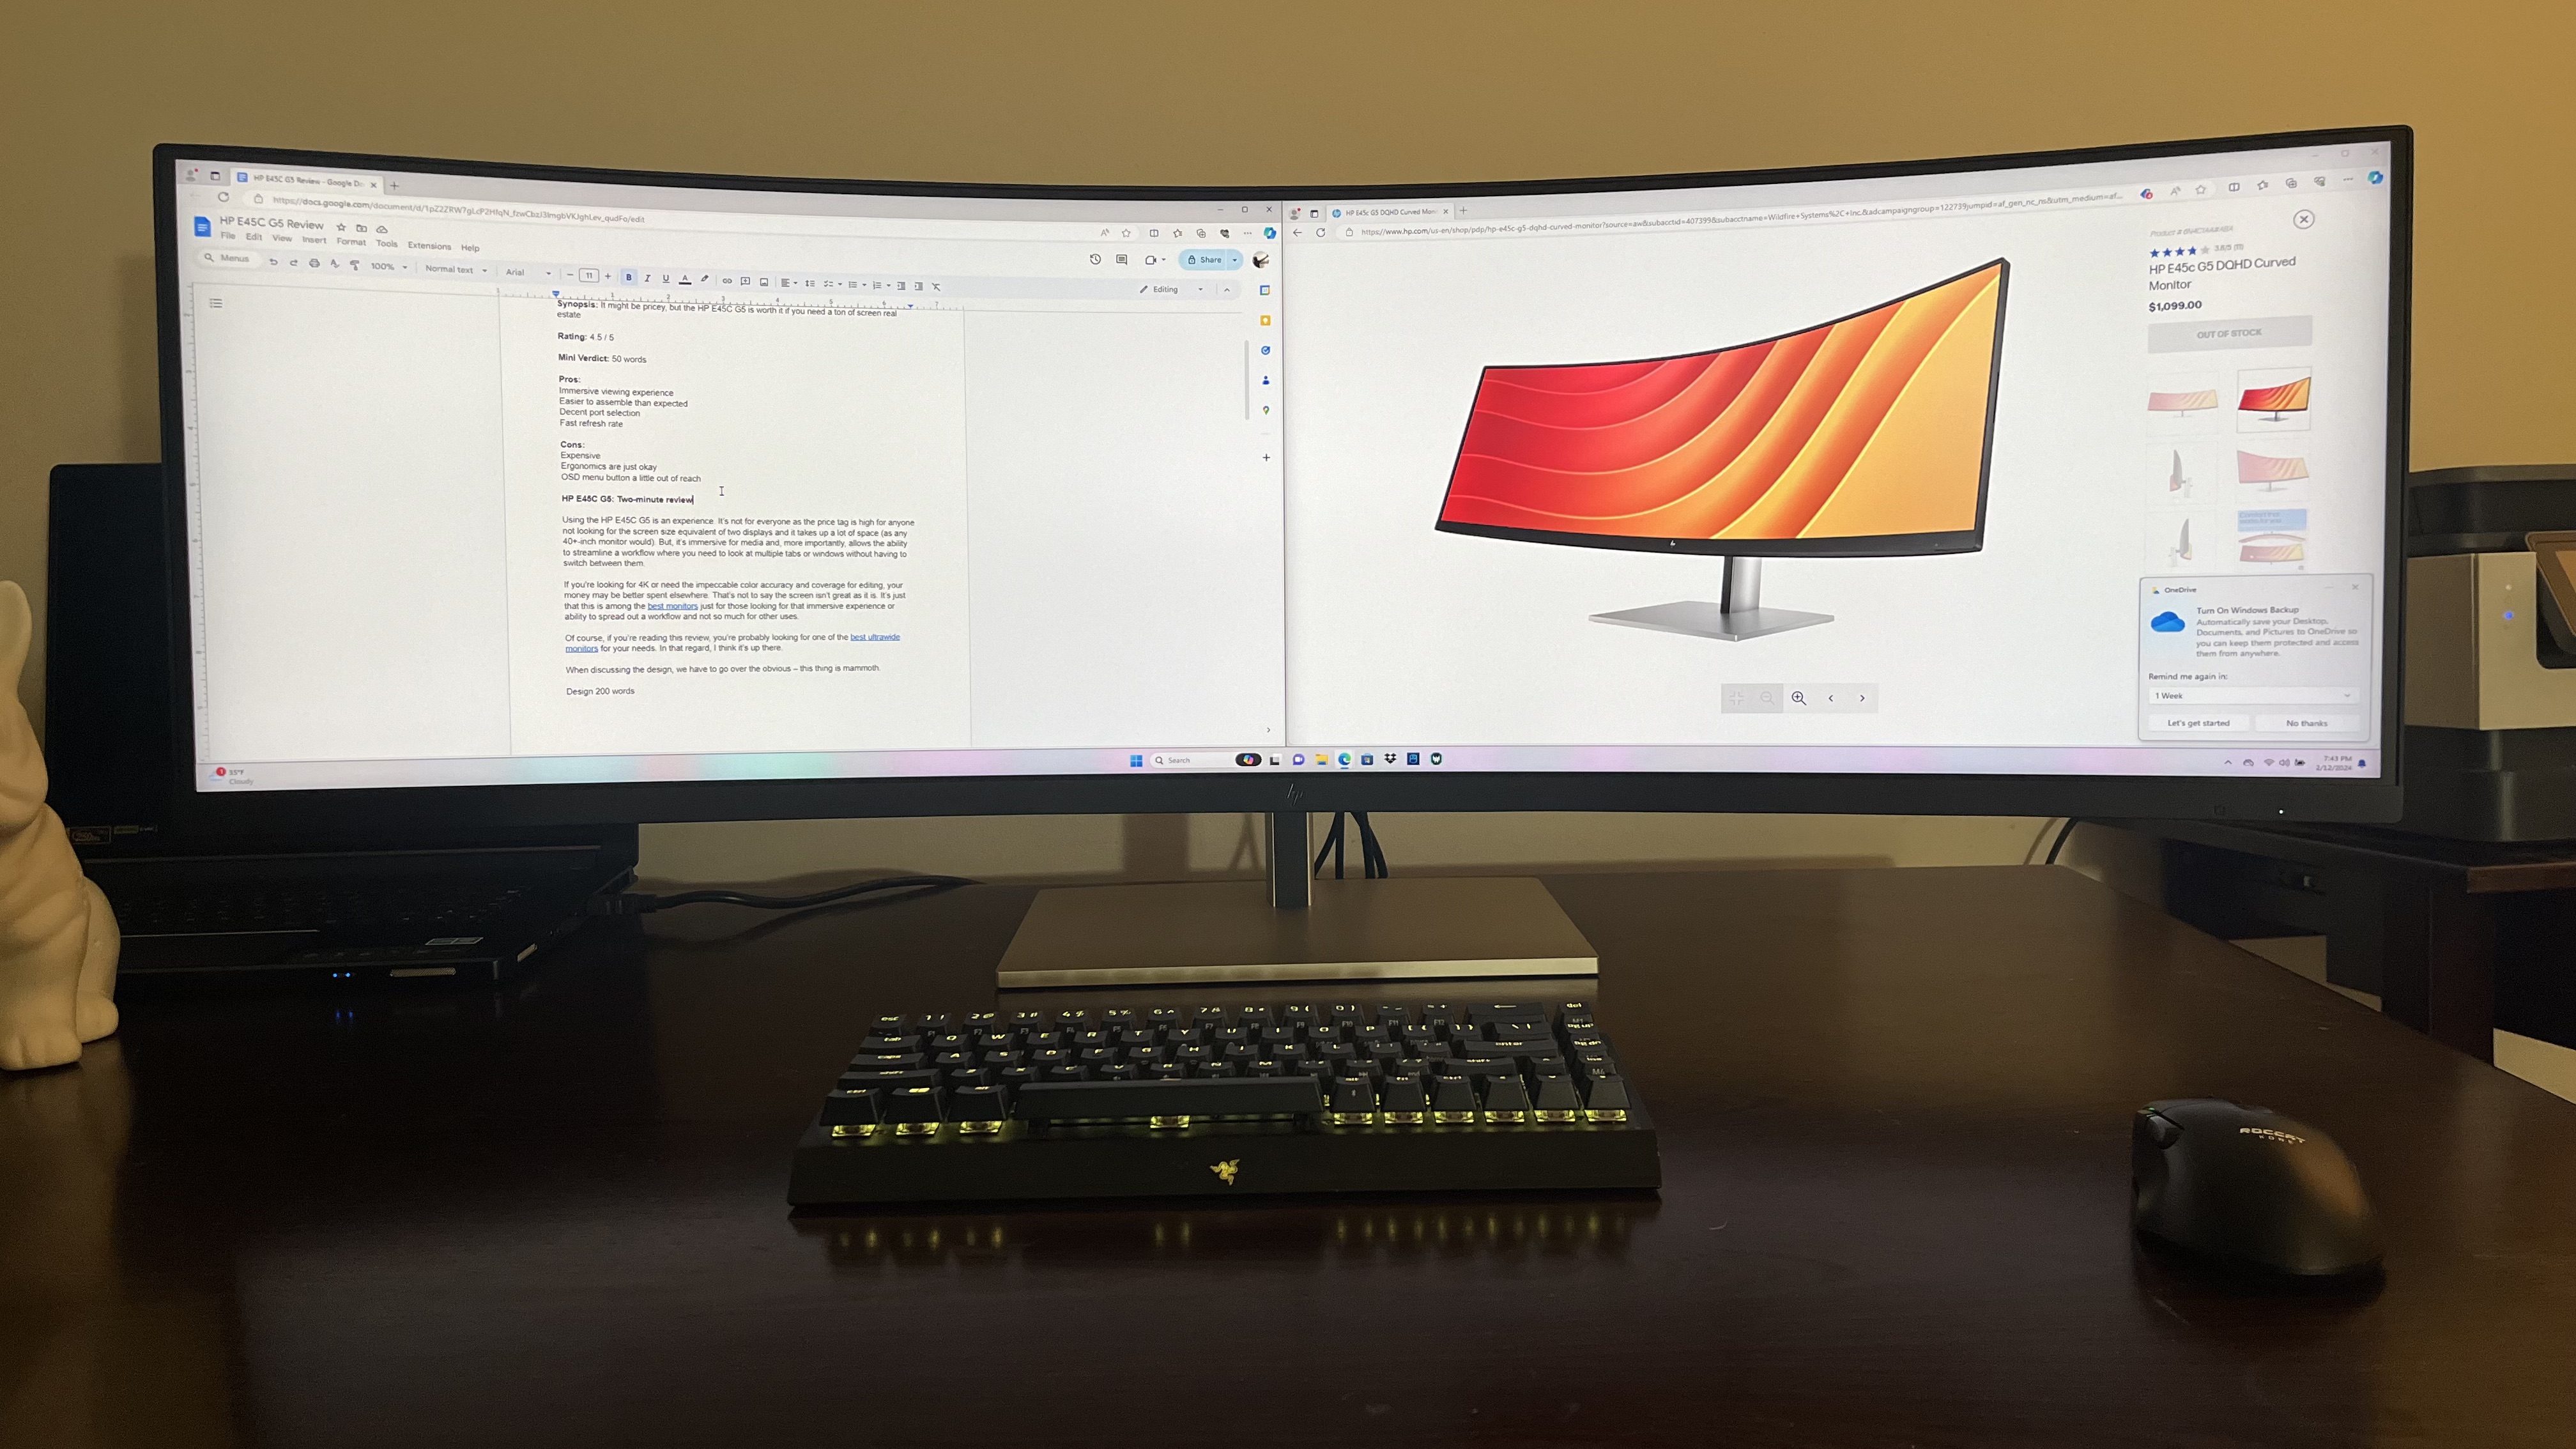 Using the HP E45c as a productivity monitor